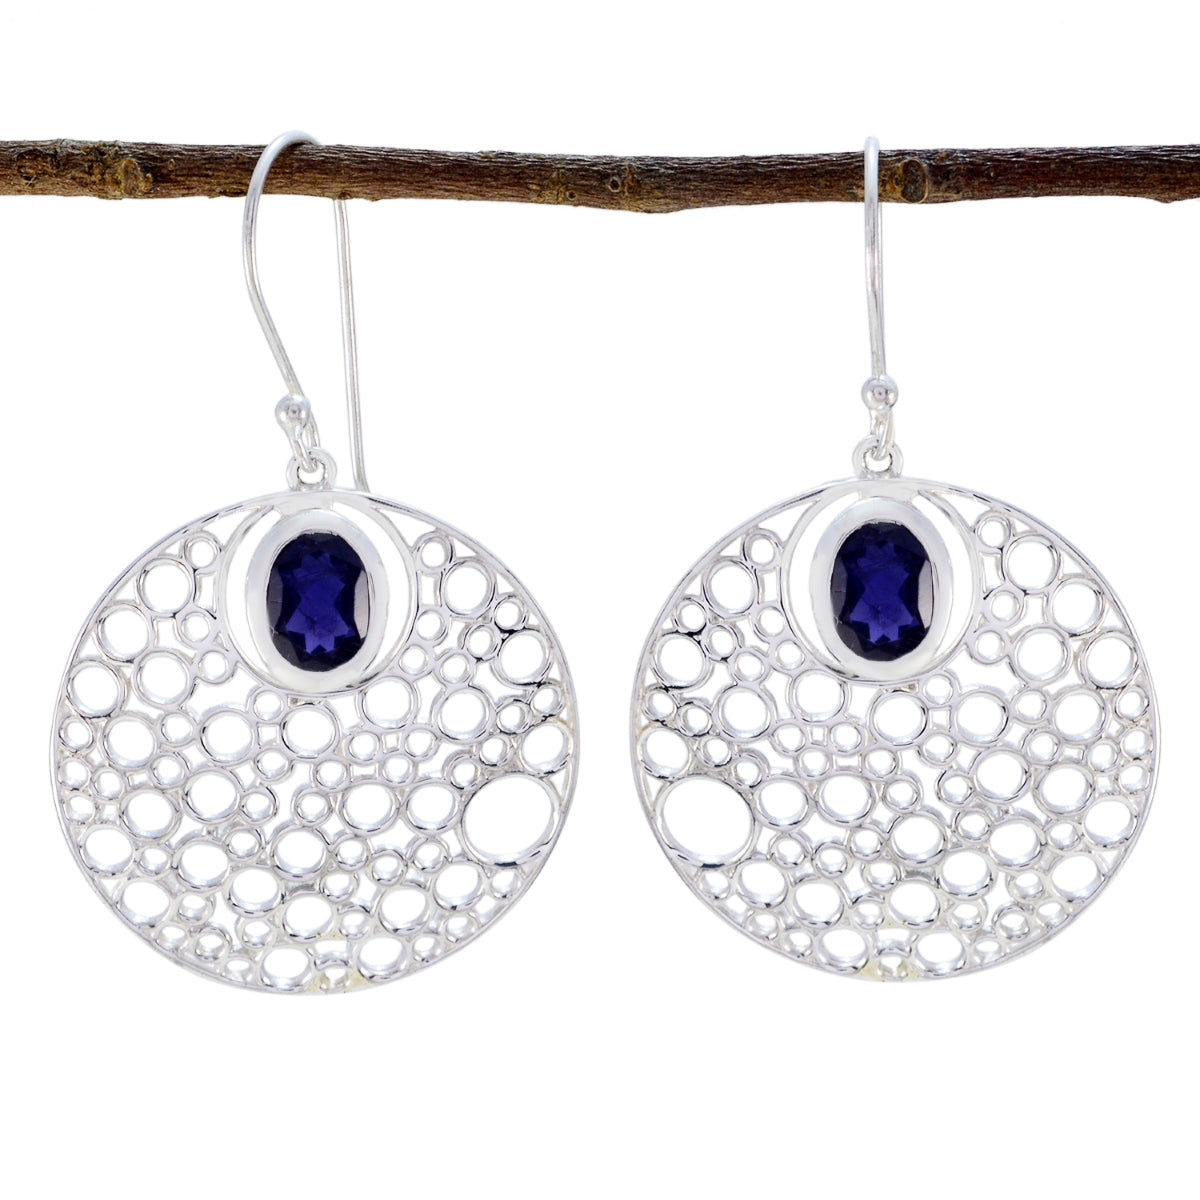 Riyo Genuine Gems round Faceted Nevy Blue Iolite Silver Earrings gift for st. patricks day